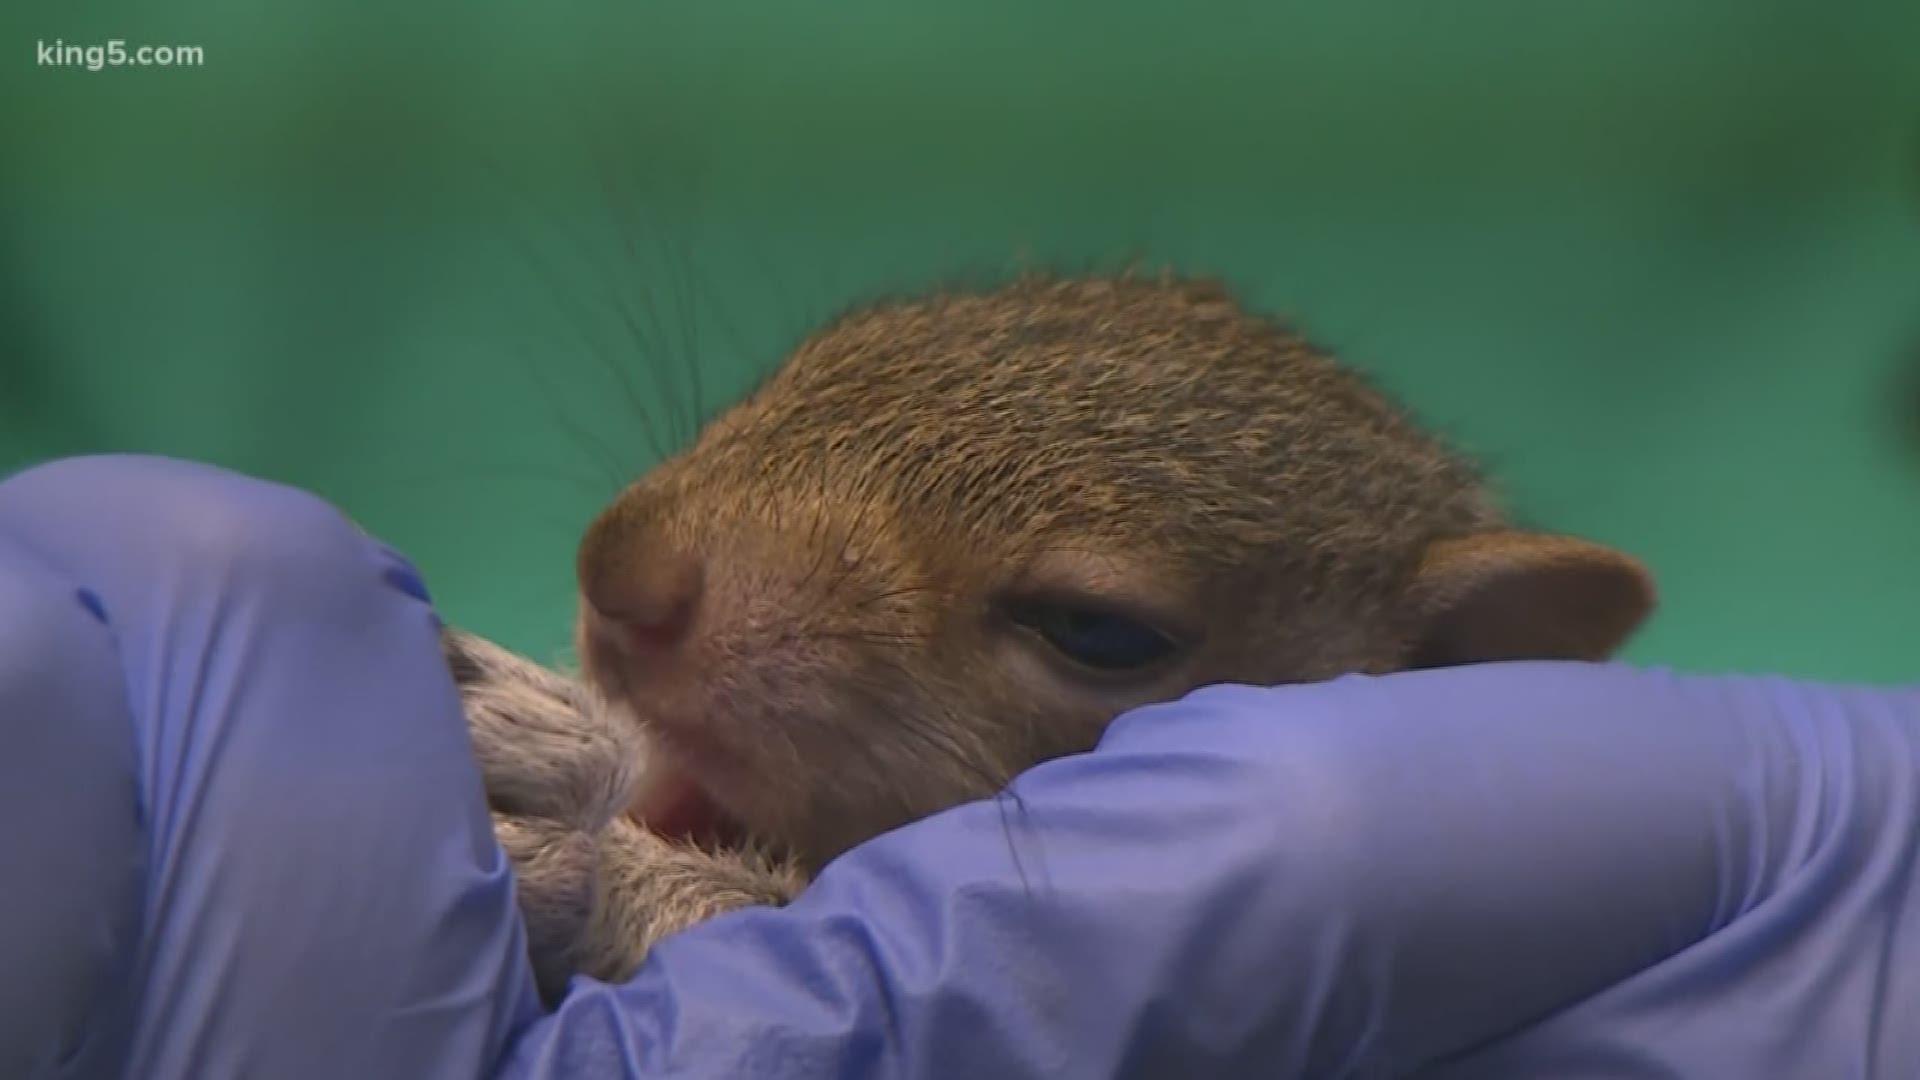 If you happen to run into an injured wild animal, one wildlife rehab center is urging you to call the professionals first. KING 5's Vanessa Misciagna explains.